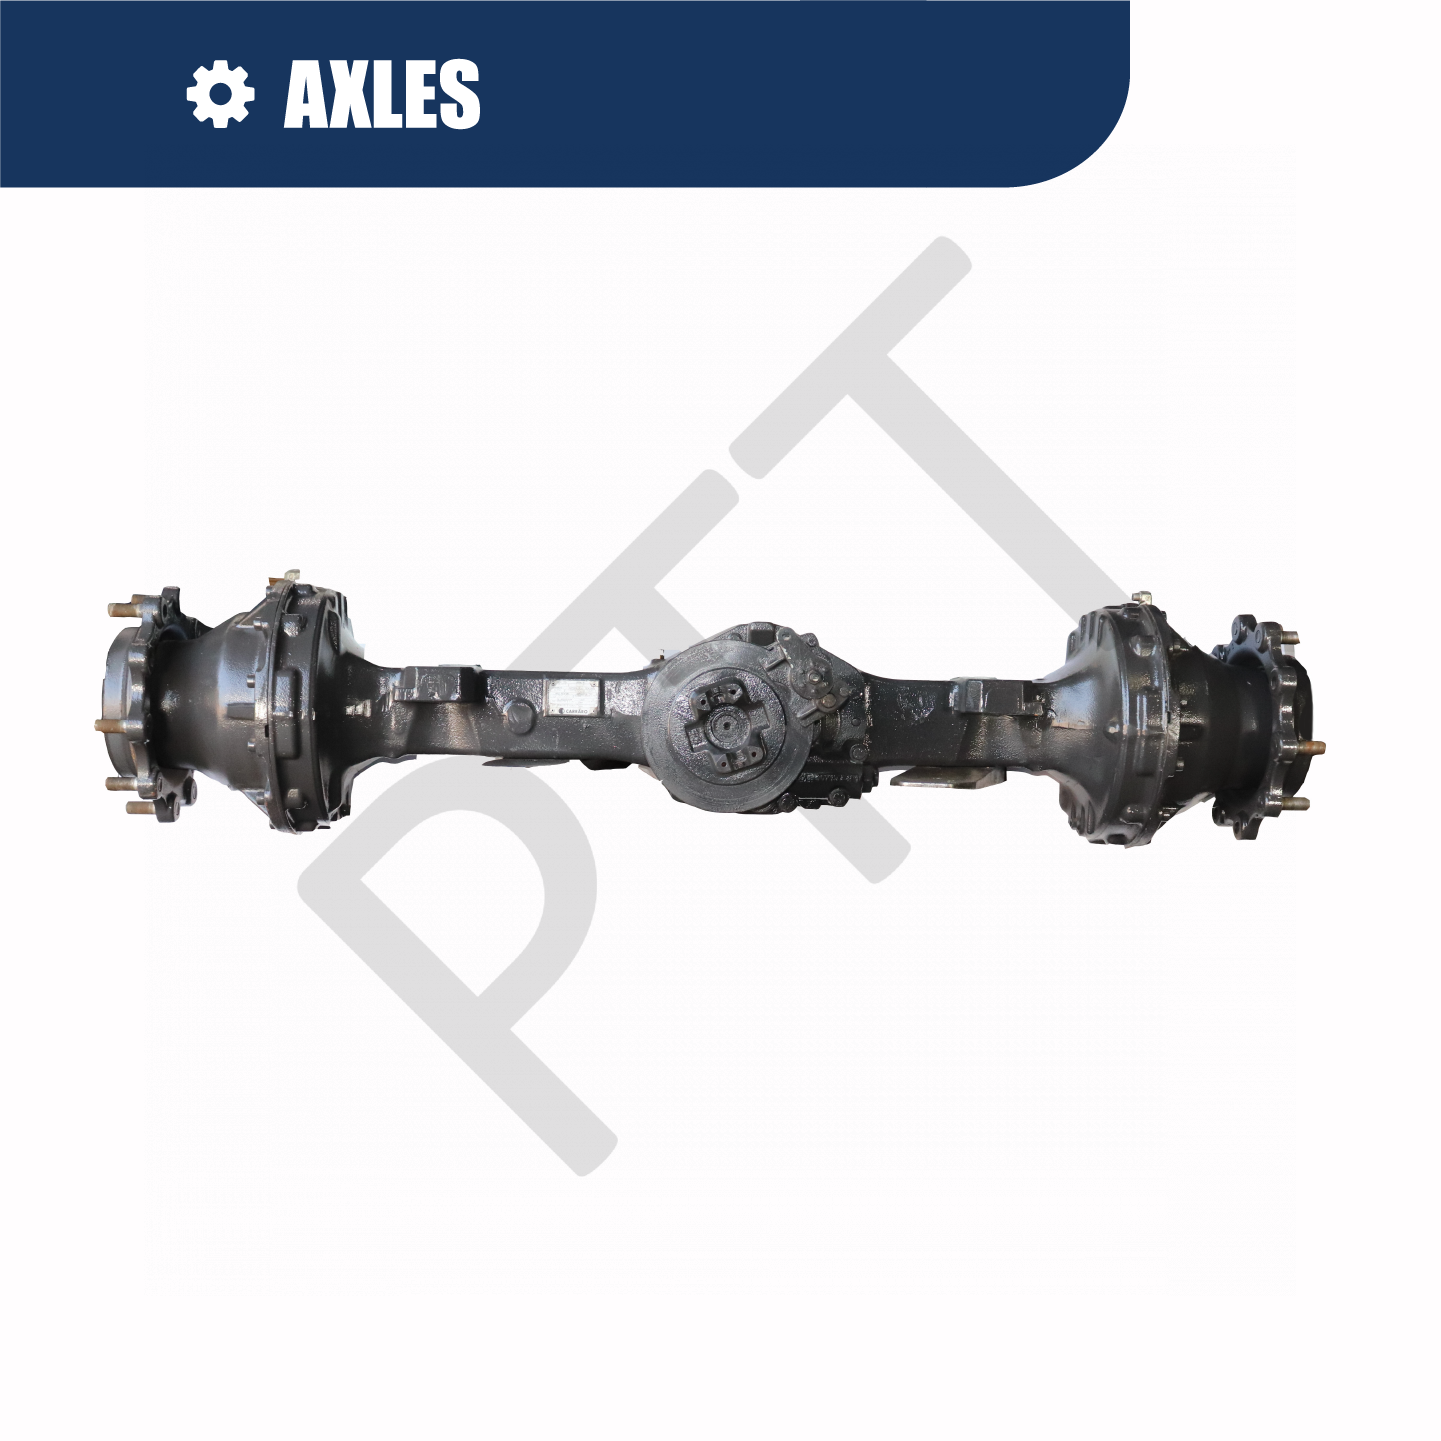 AXLES (WITH BANNER)